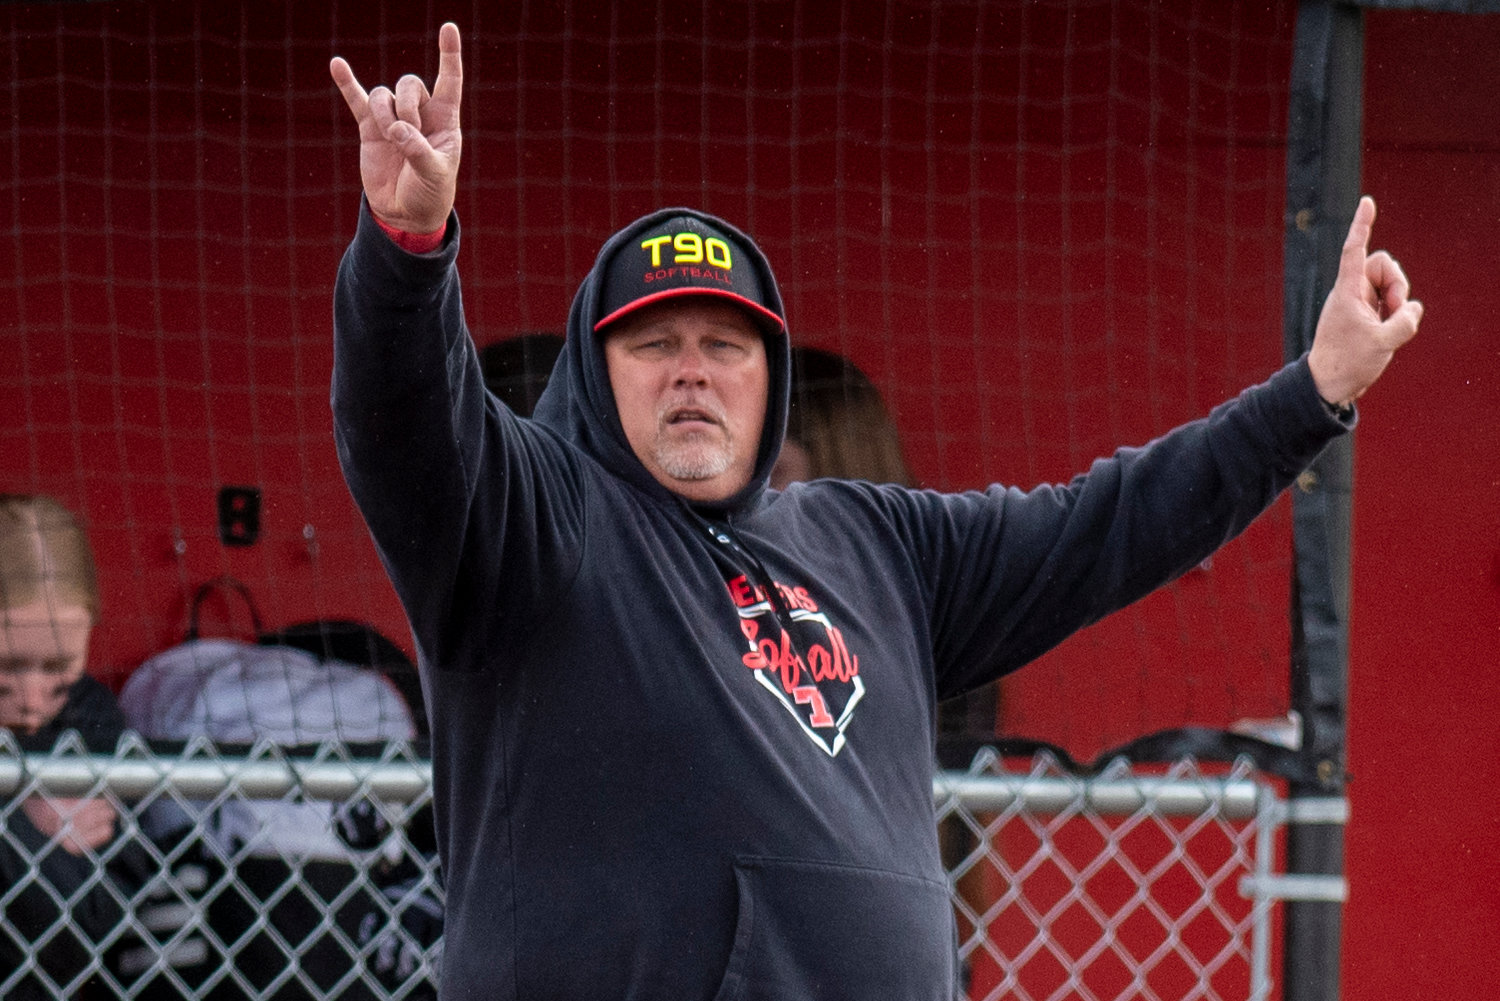 Tenino softball coach Chris Johnson signals two outs to Beaver baserunners during a home game against Elma on April 26, 2022.